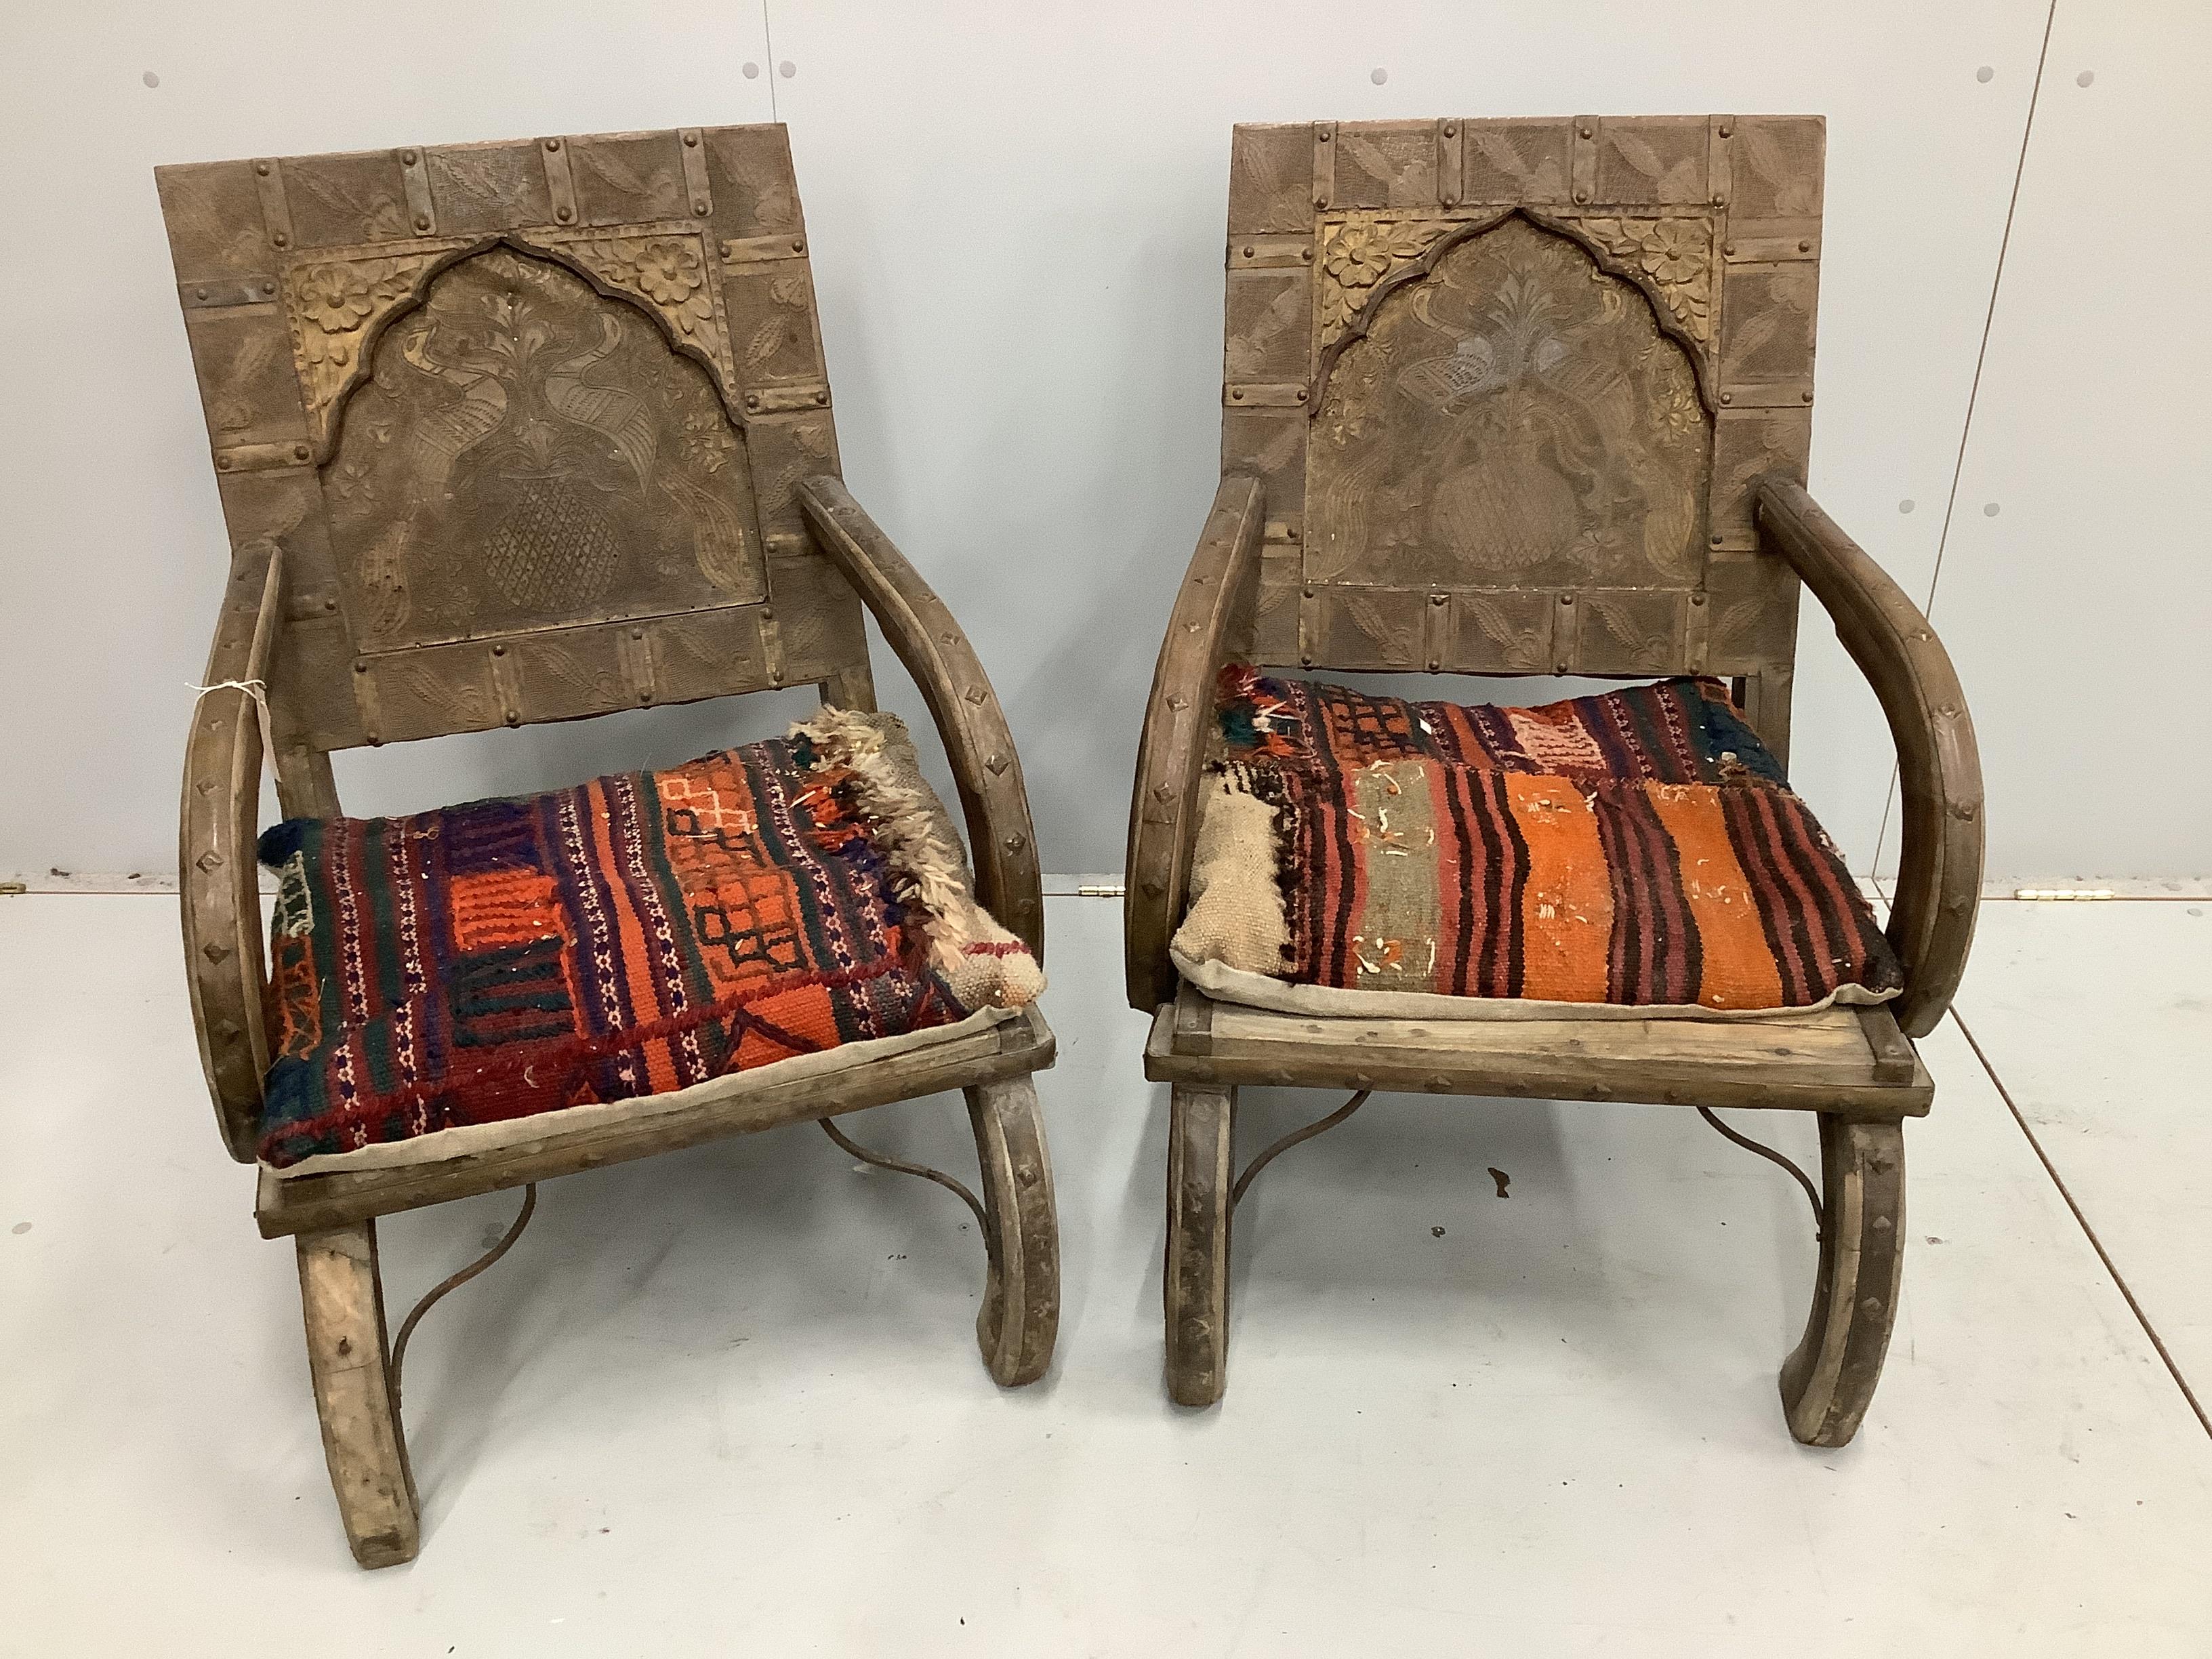 A pair of Indian metal clad low chairs with Kilim covered cushions, width 57cm, depth 48cm, height 89cm